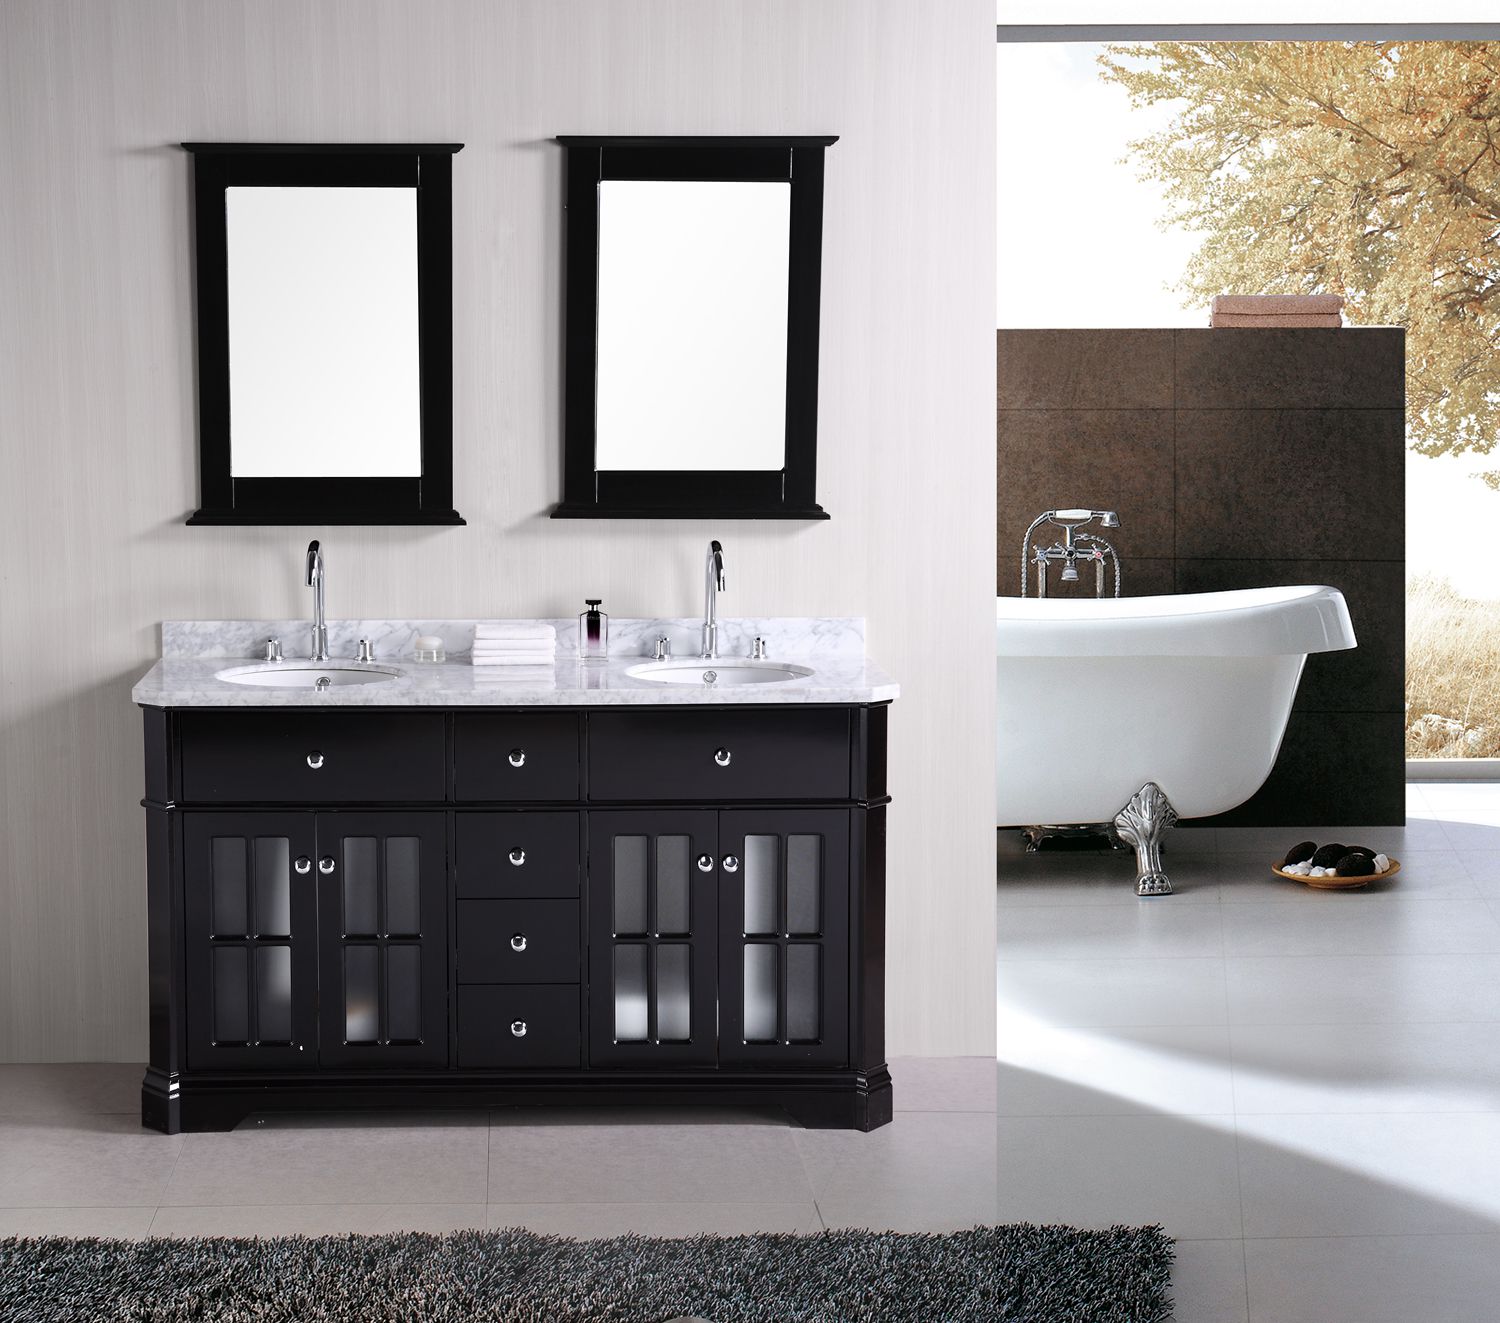 Twin Double Design Best Twin Double Sink Vanity Design With Grey Fur Rug Near White Bathtub At House Interior Image Bathroom Double Sink Vanity Application For Spacious Bathroom Design